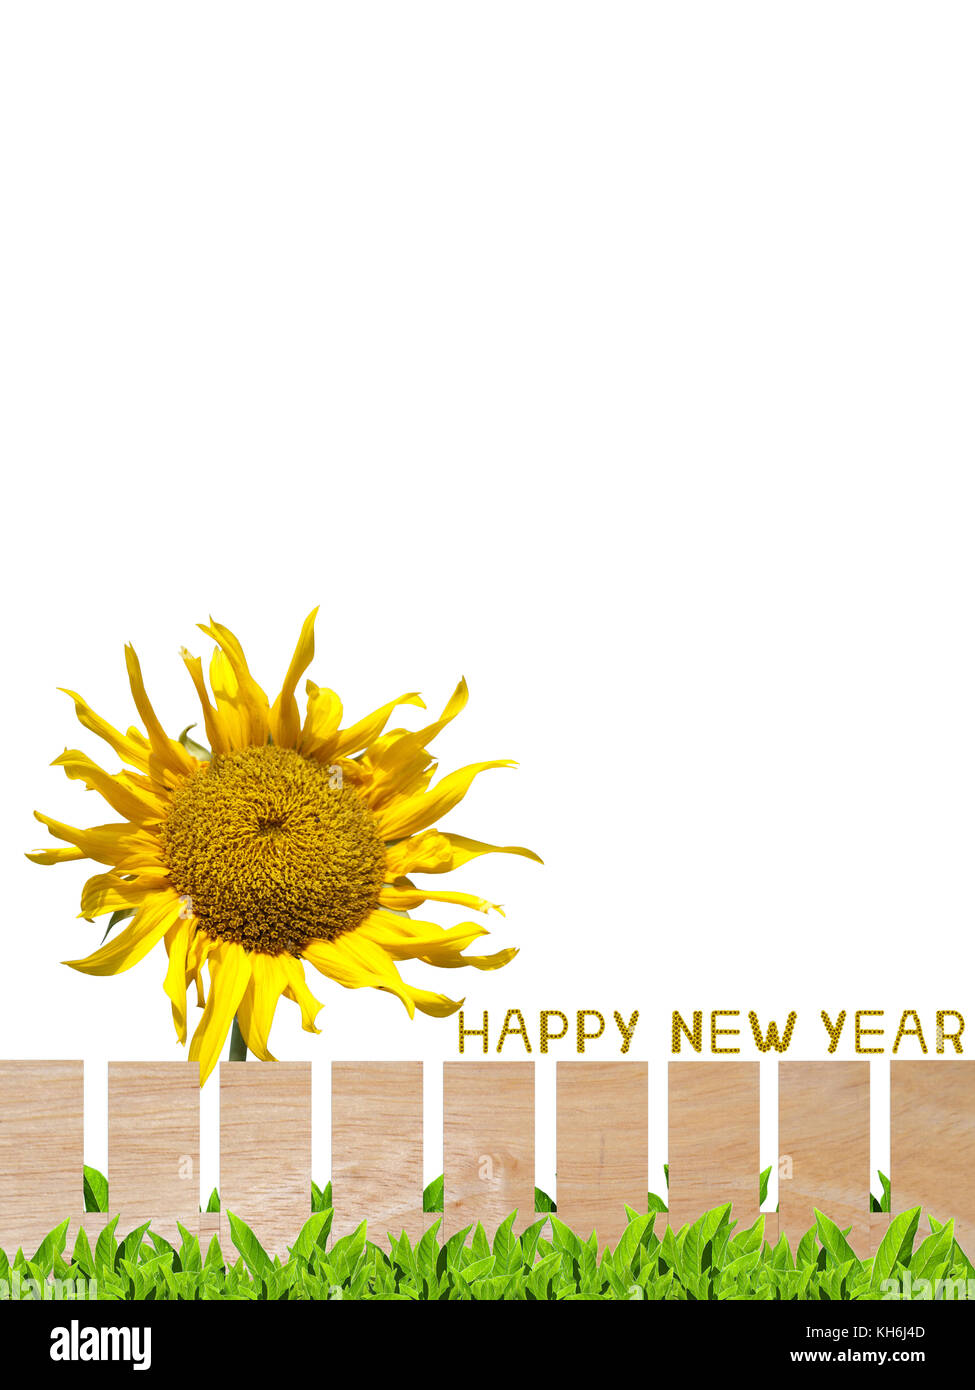 Beautiful garden fence with sunflower letter arrange in the words Happy New Year, clipping path included. Stock Photo